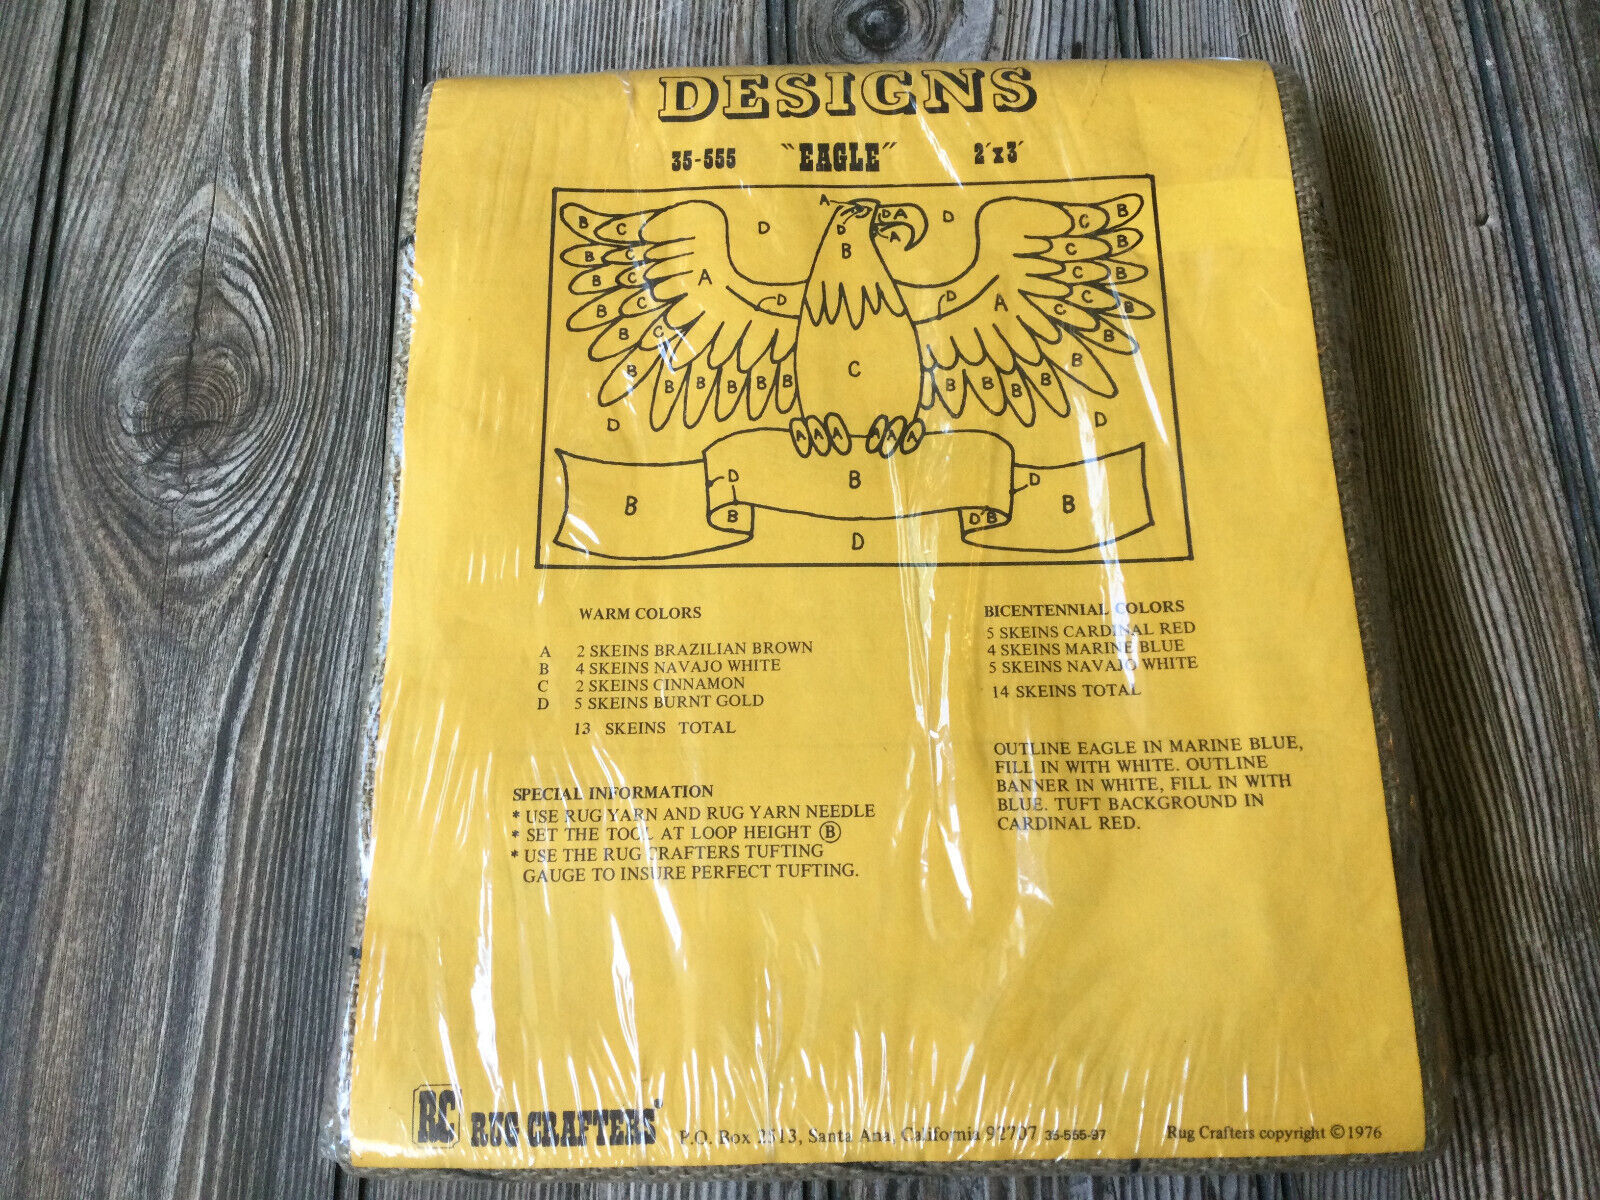 Vintage 1976 Rug Crafters Speed Tufting Pattern 35-555 "EAGLE" (2' x 3') NEW - $54.70